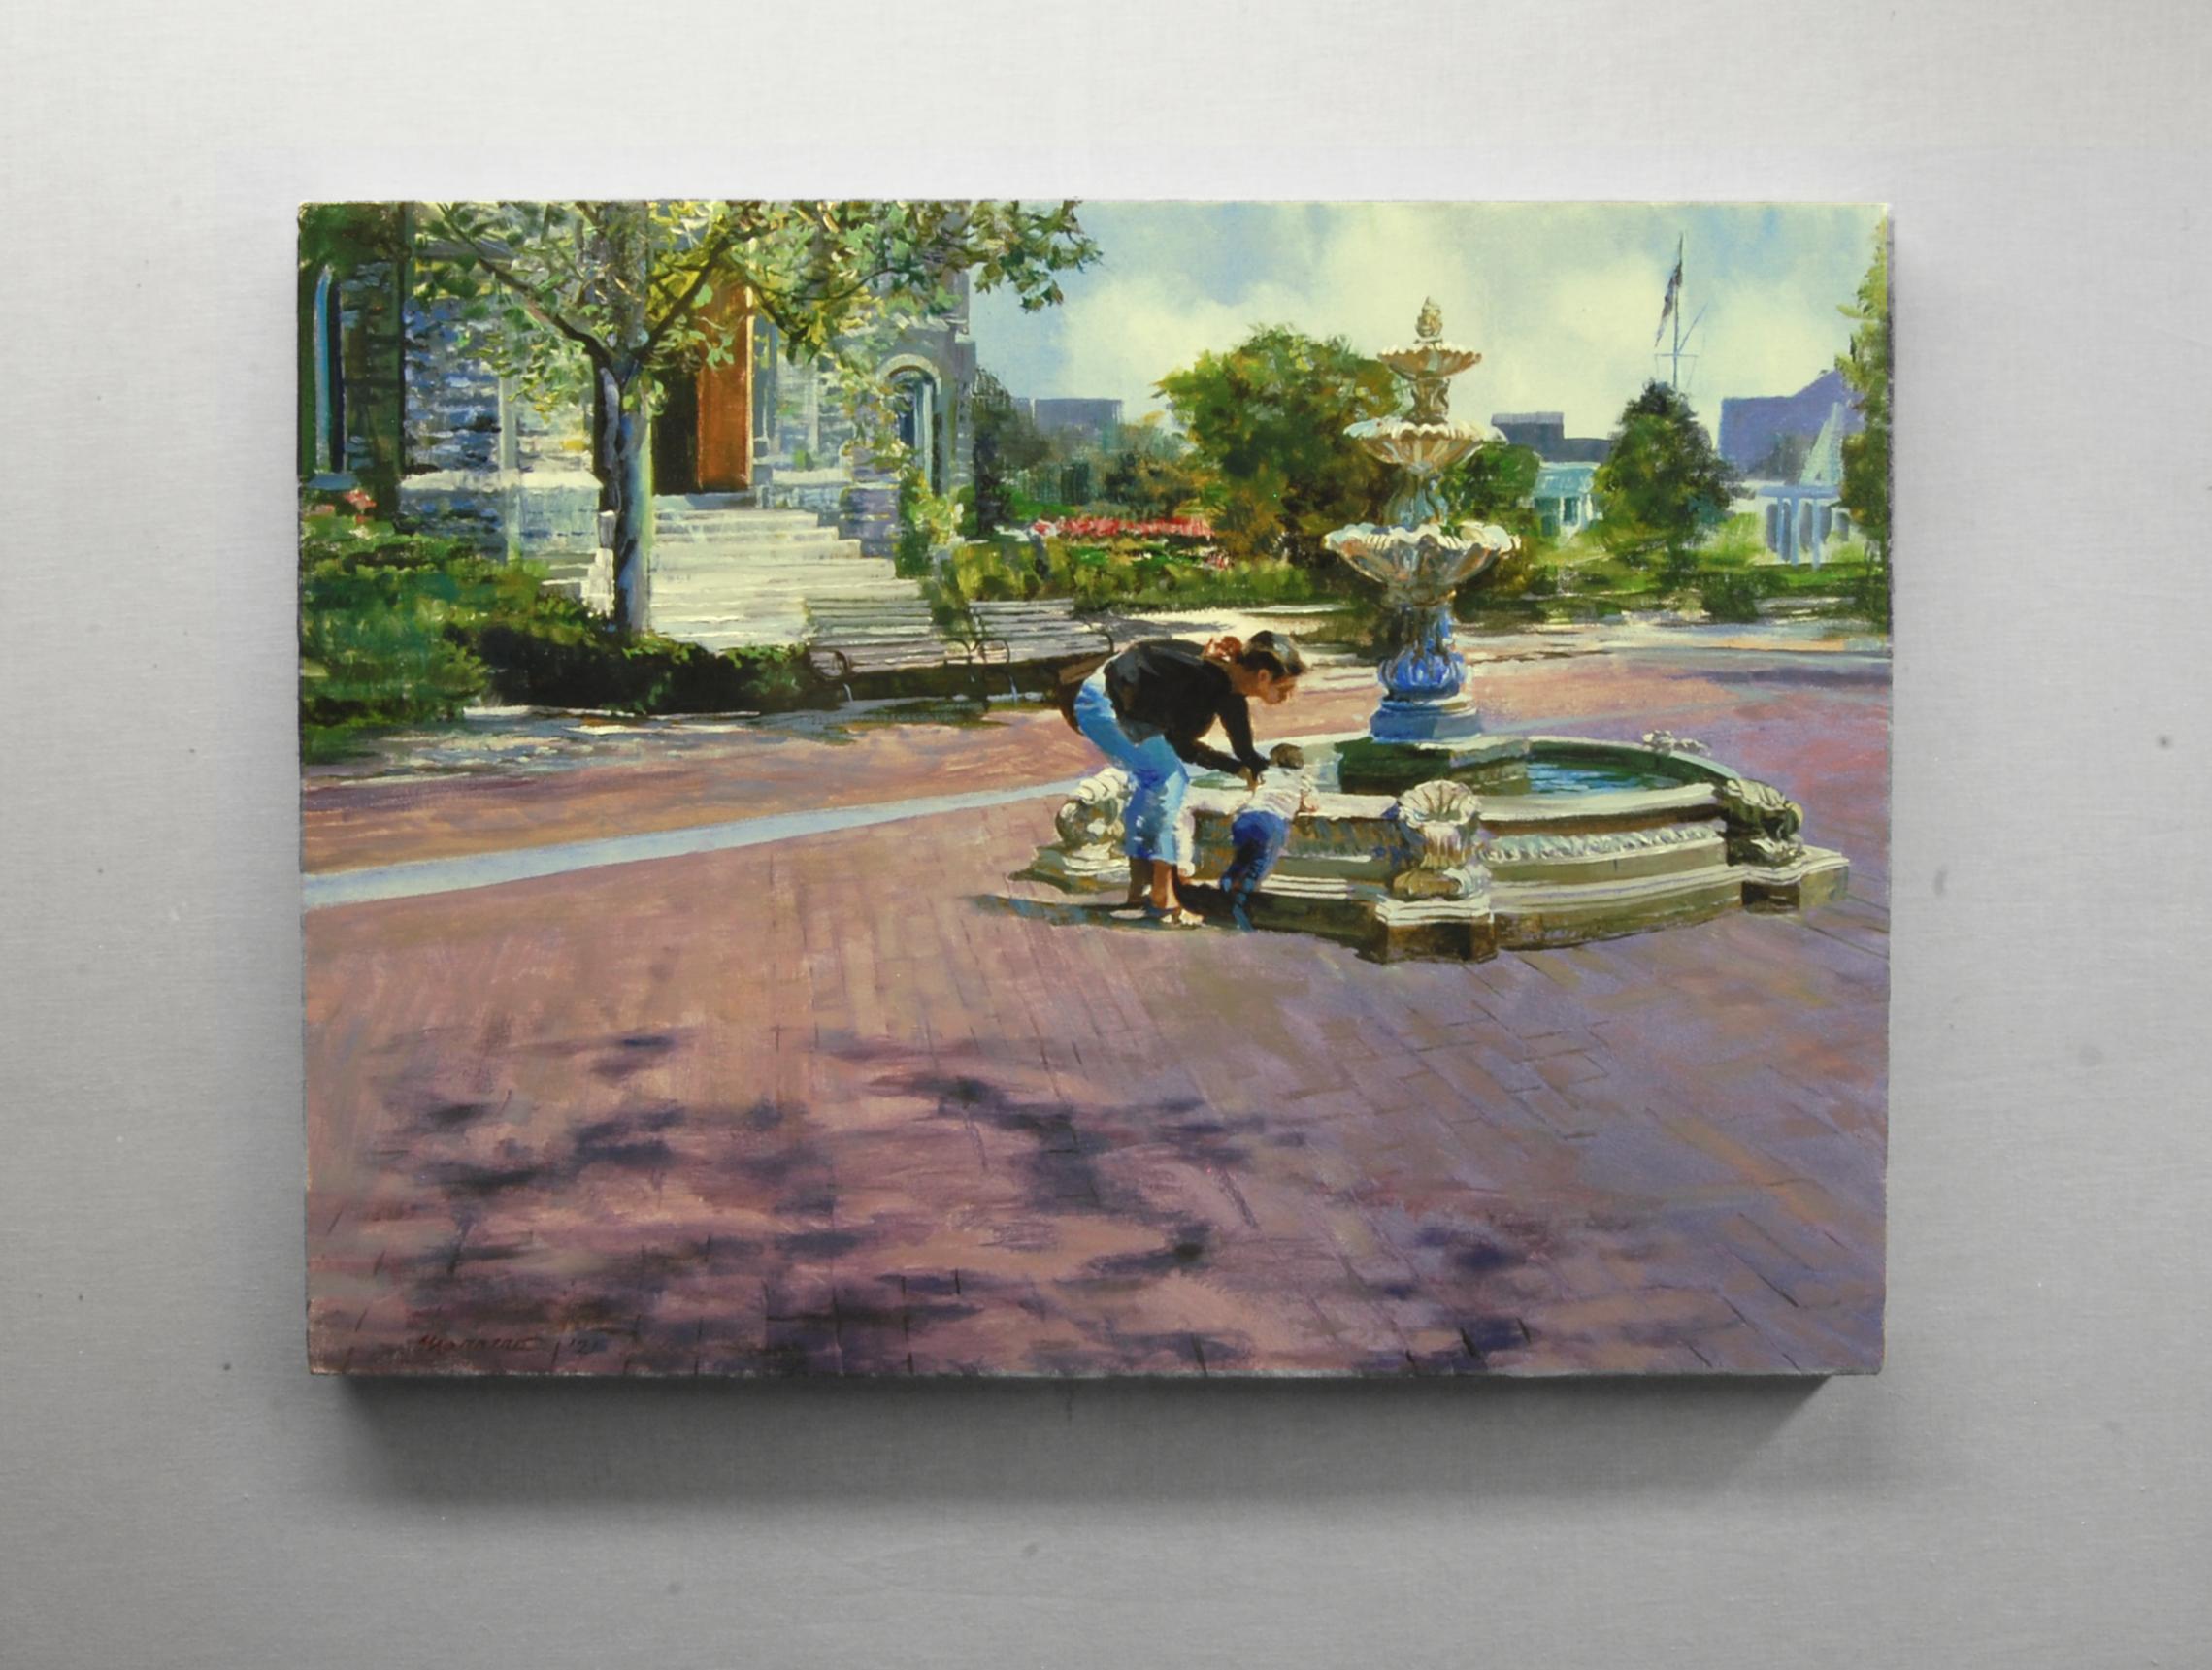 <p>Artist Comments<br />Artist Onelio Marrero depicts a mother and her child dropping coins into a fountain for good luck. The quiet moment is painted in brilliant morning light with dappled shadows in the foreground. Behind them lies a verdant